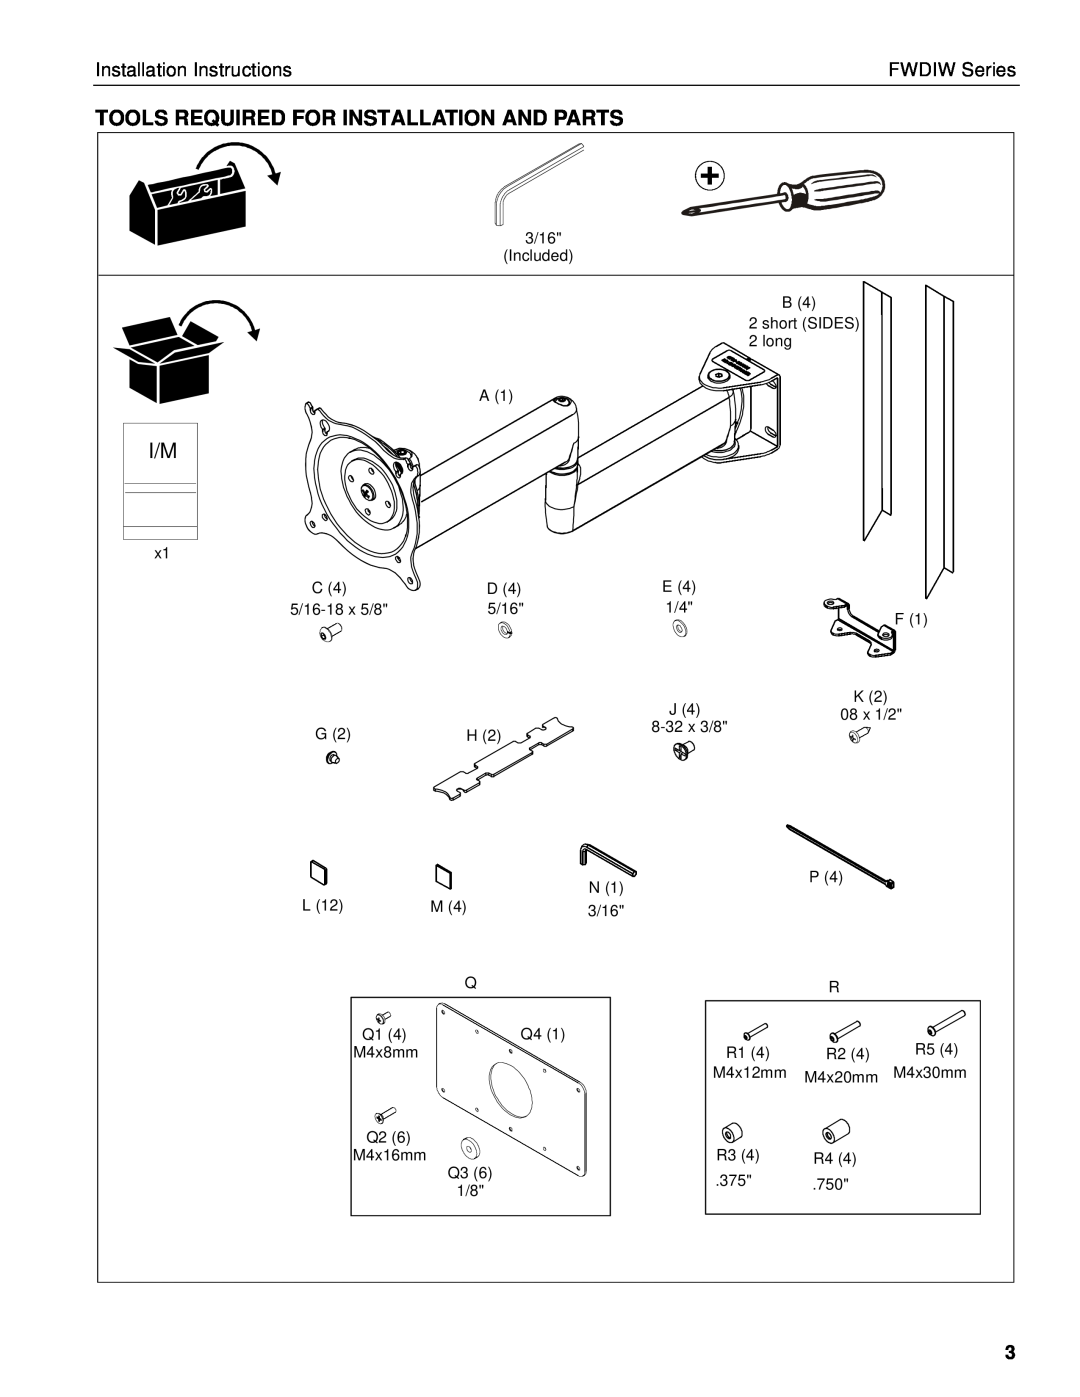 Chief Manufacturing FWDIW-I Series Tools Required For Installation And Parts, Installation Instructions, FWDIW Series 